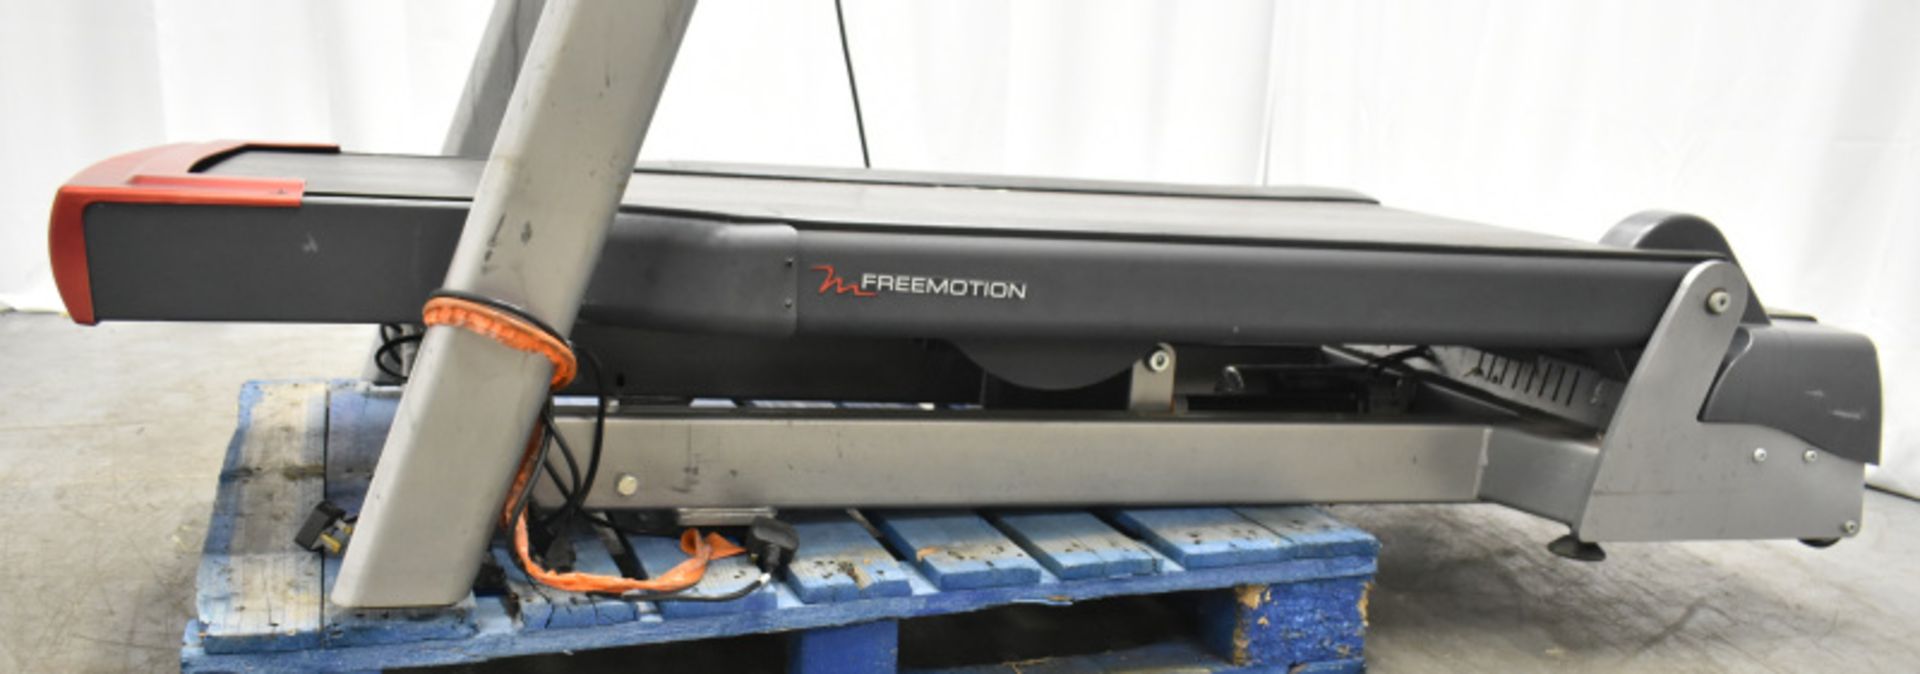 M Freemotion Treadmill - Doesn't Power Up Functions Not Tested - Image 14 of 14